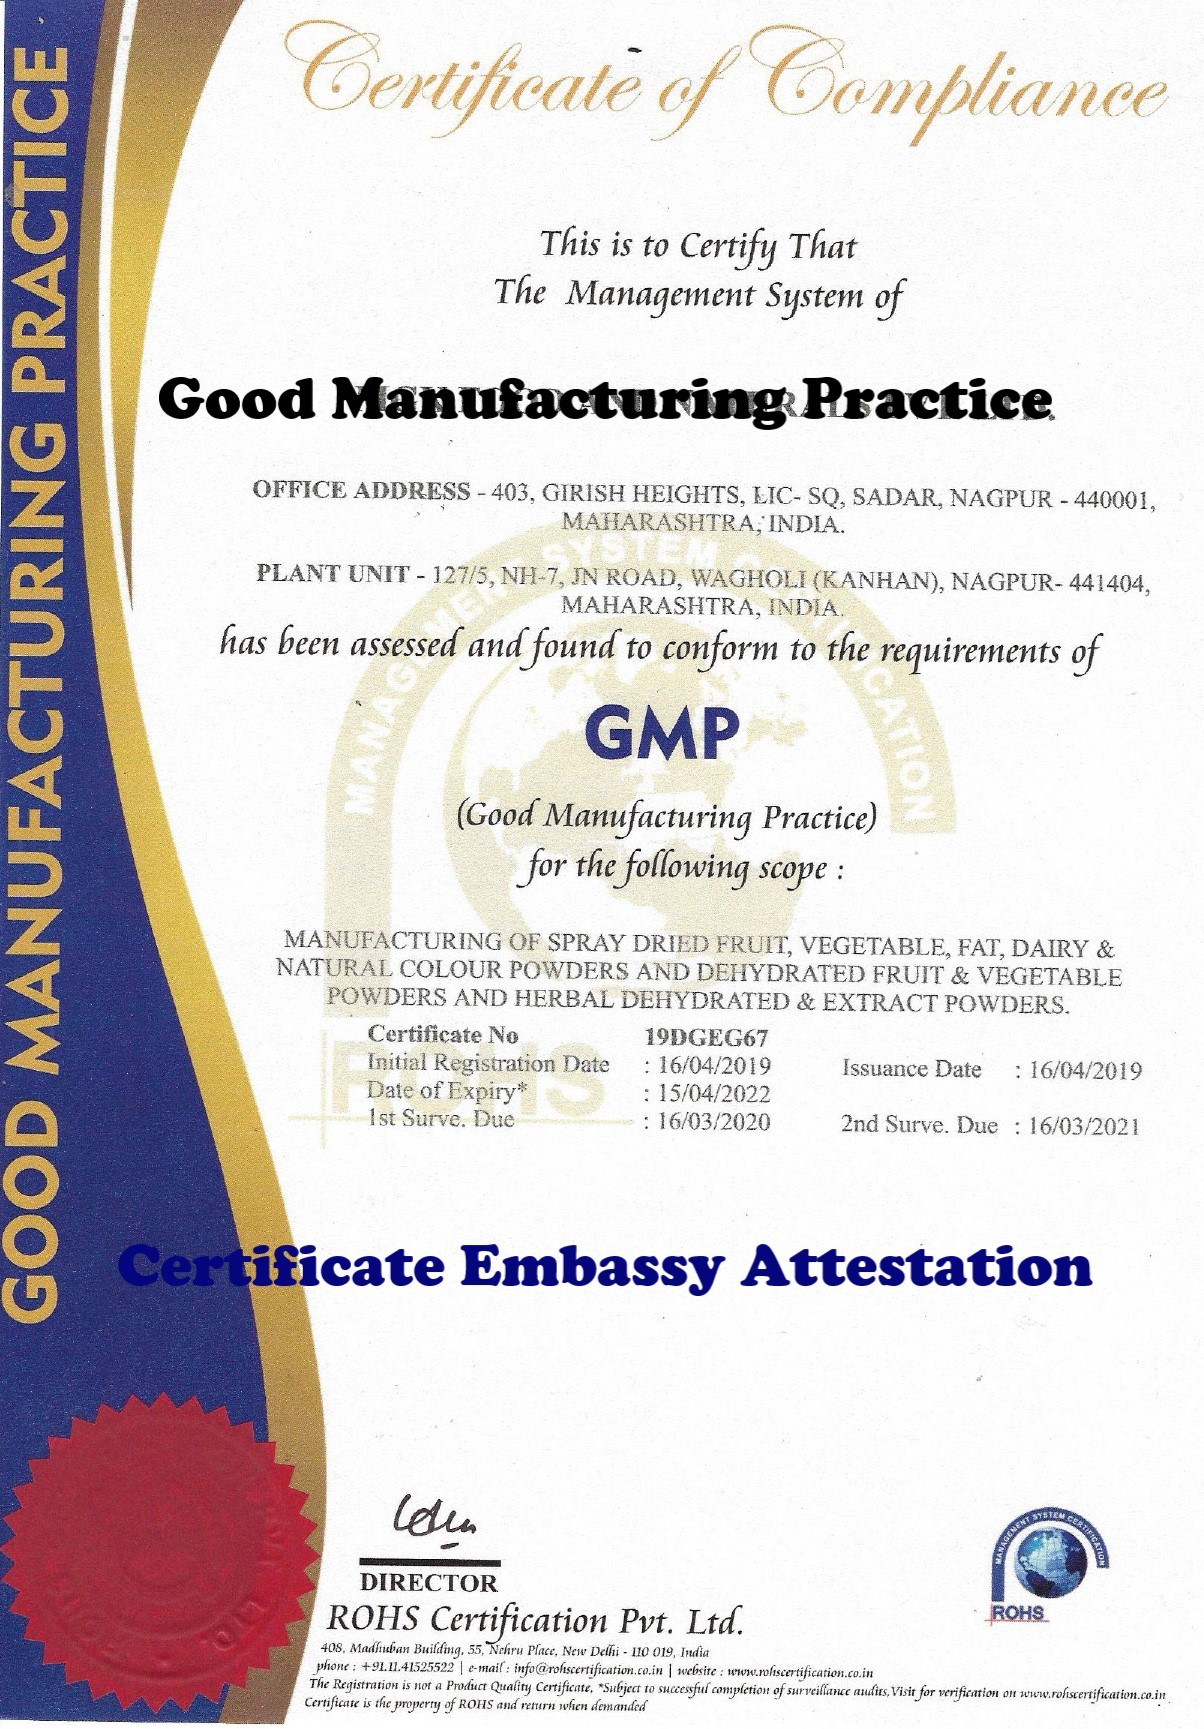 GMP Certificate Attestation from Indonesia Embassy